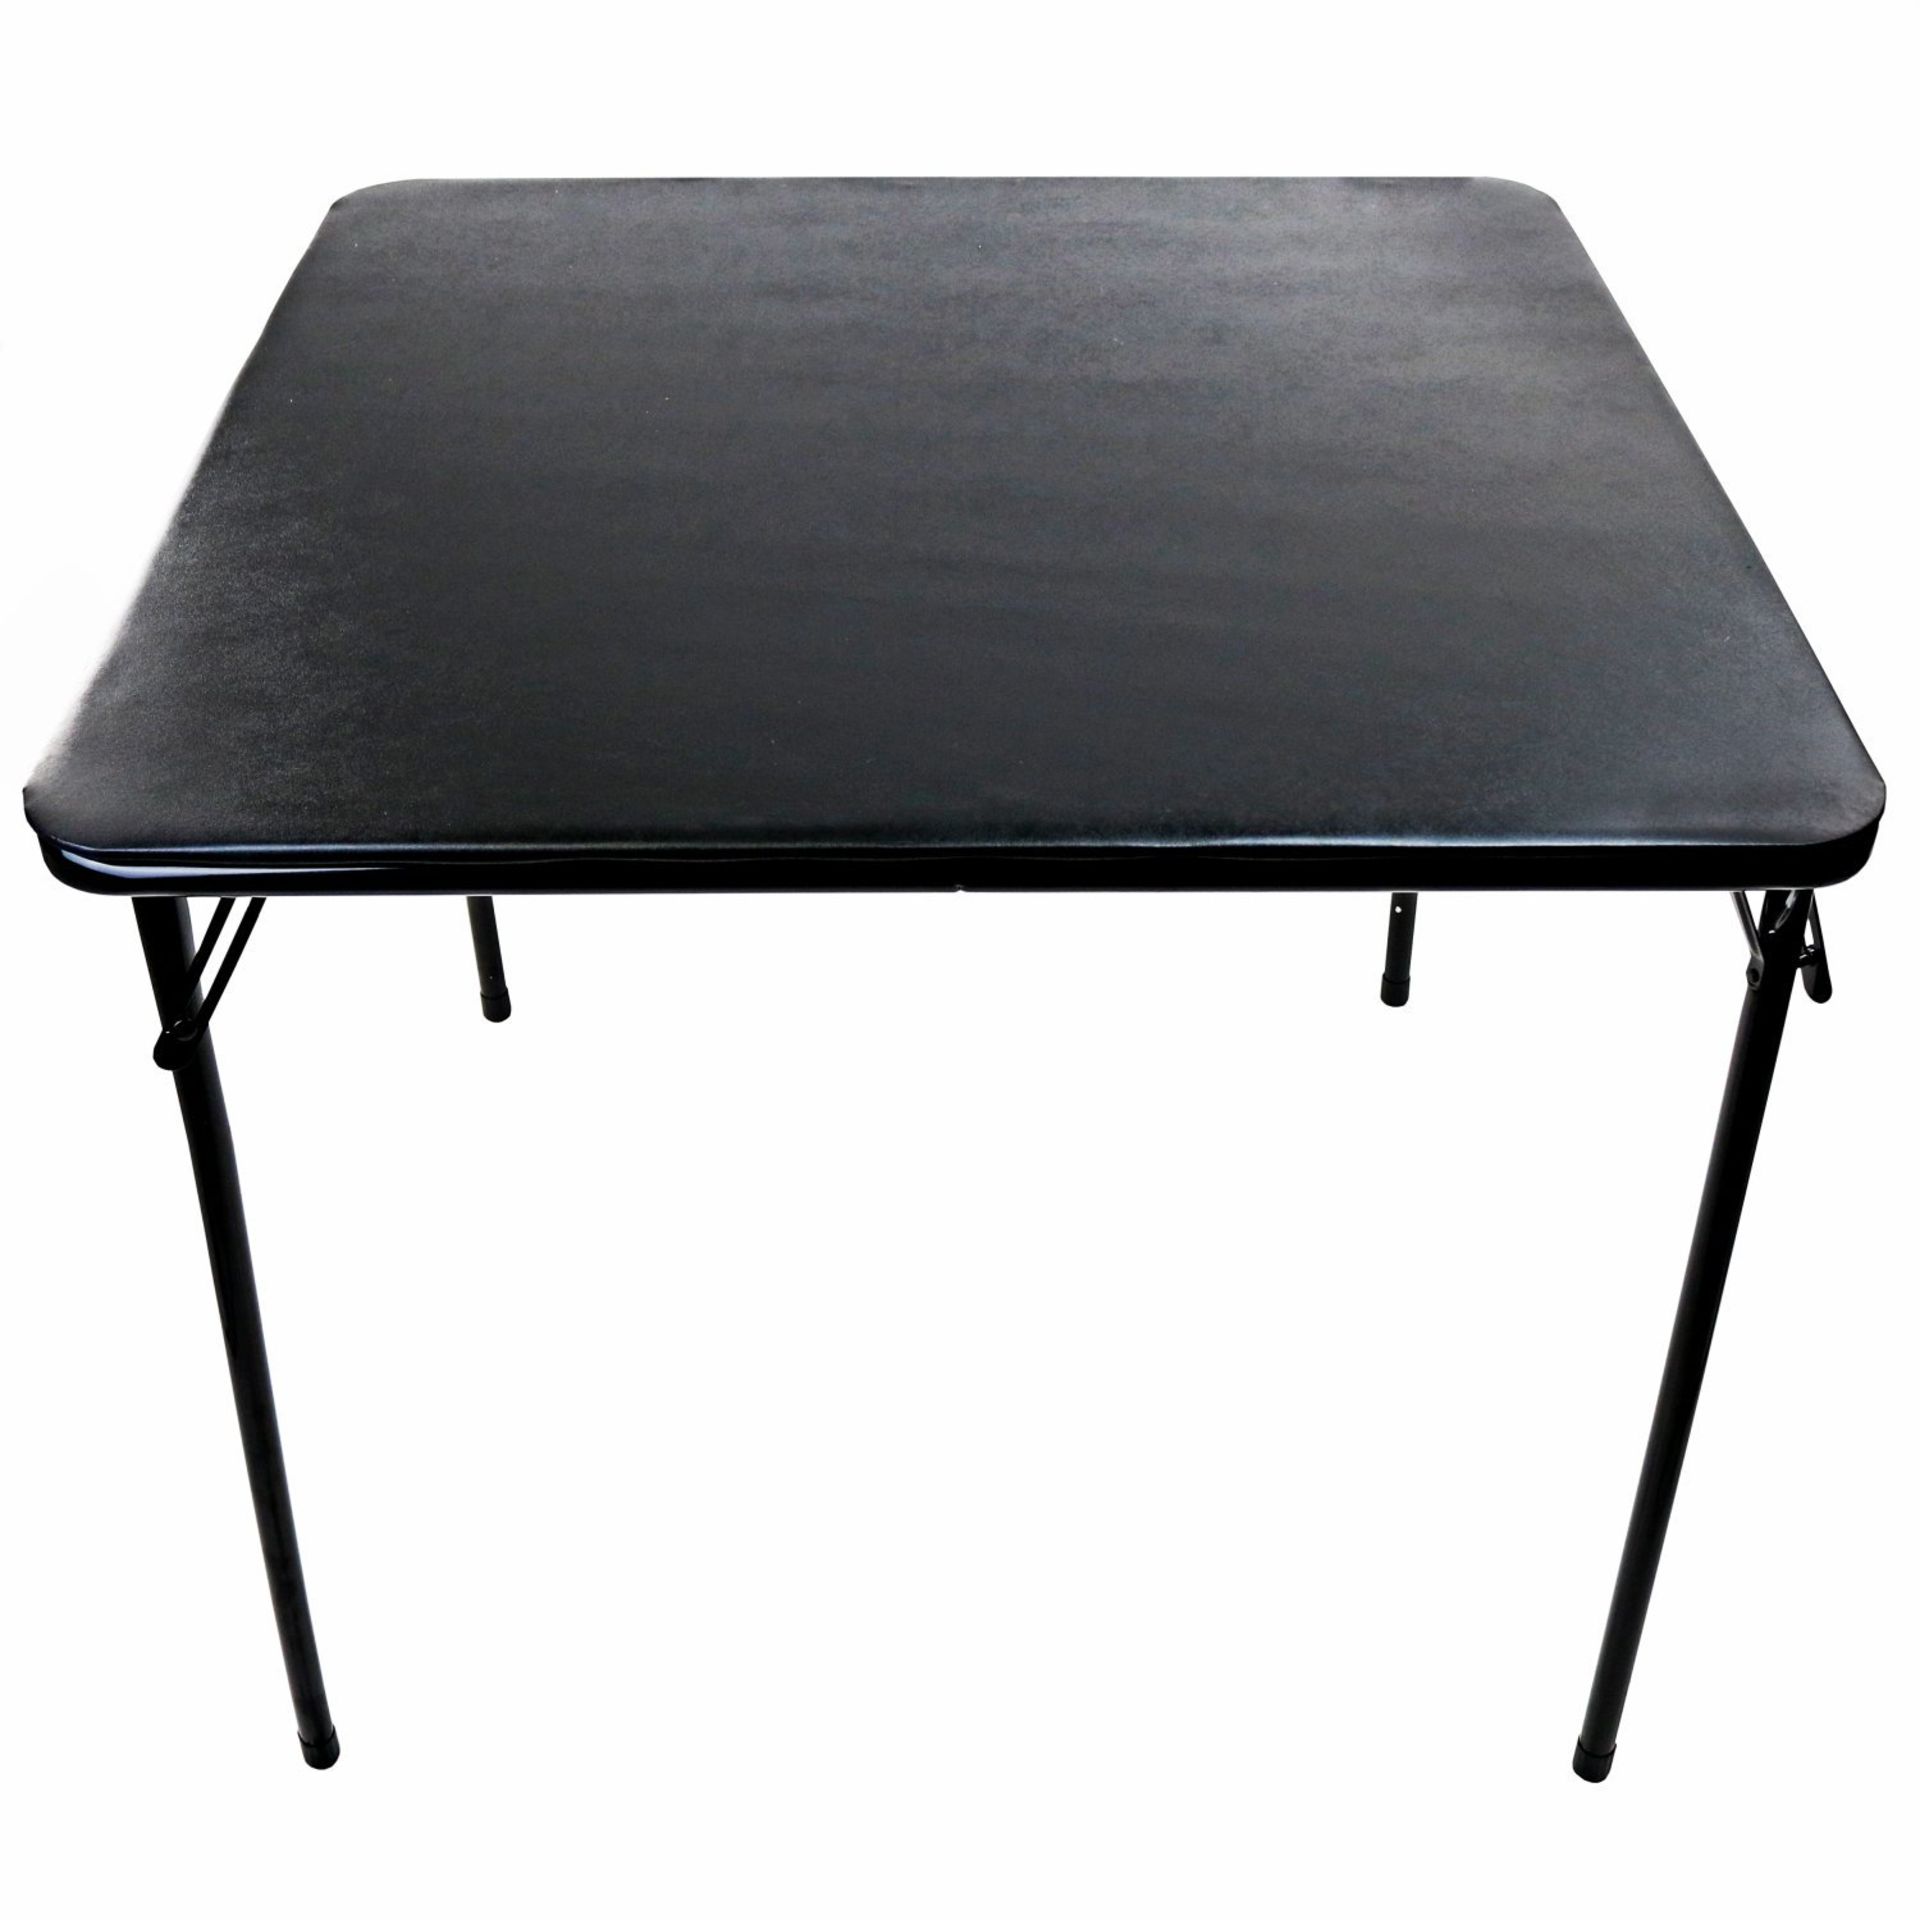 (TD73) Square Folding Standard Bridge Card Game Black Table Perfect for playing Bridge or ... - Image 2 of 2